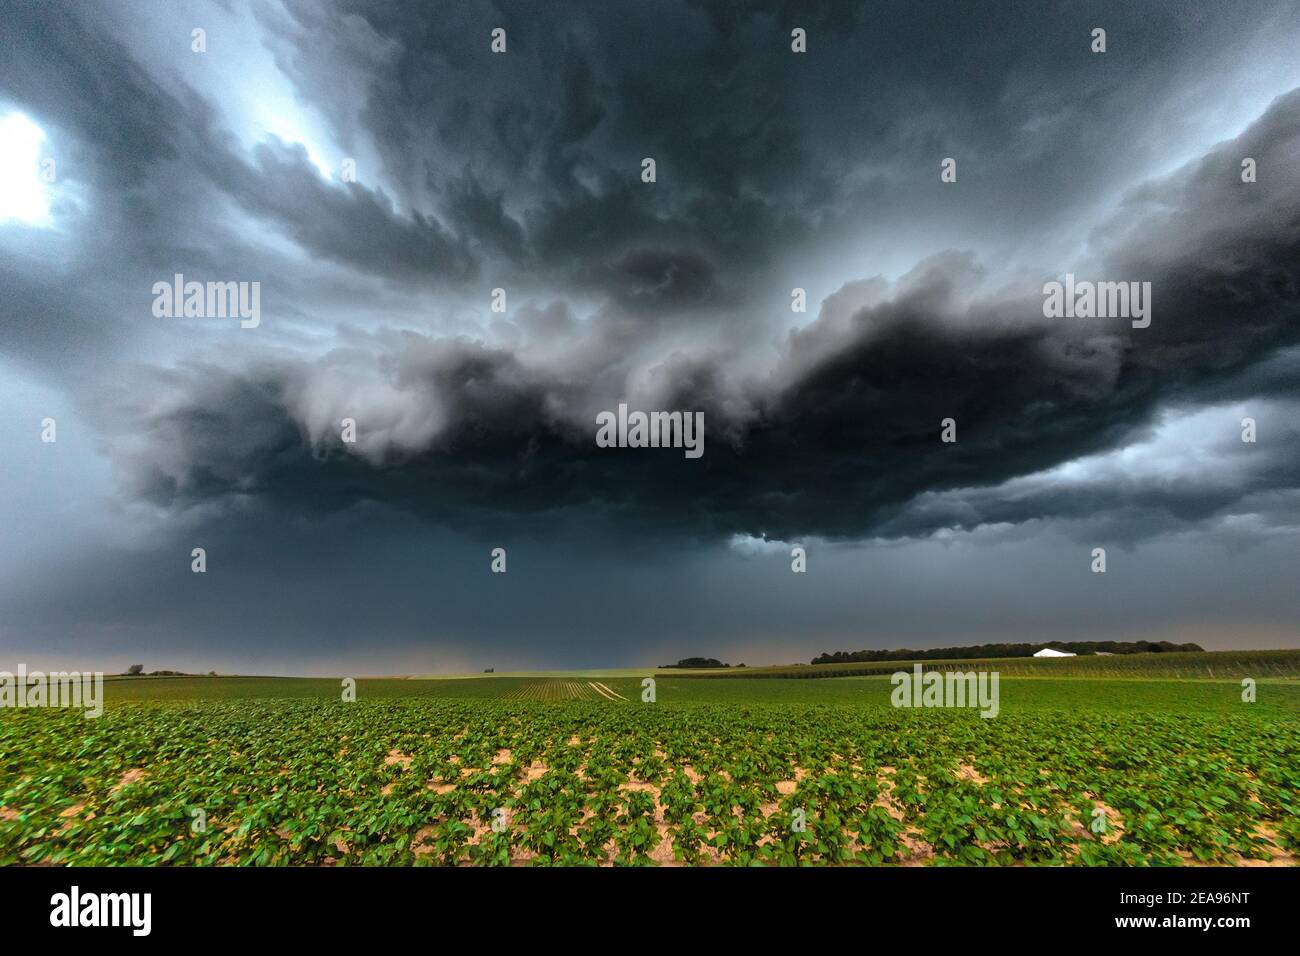 A threatening thunderstorm cell moves from Liège, Belgium across arable land Stock Photo